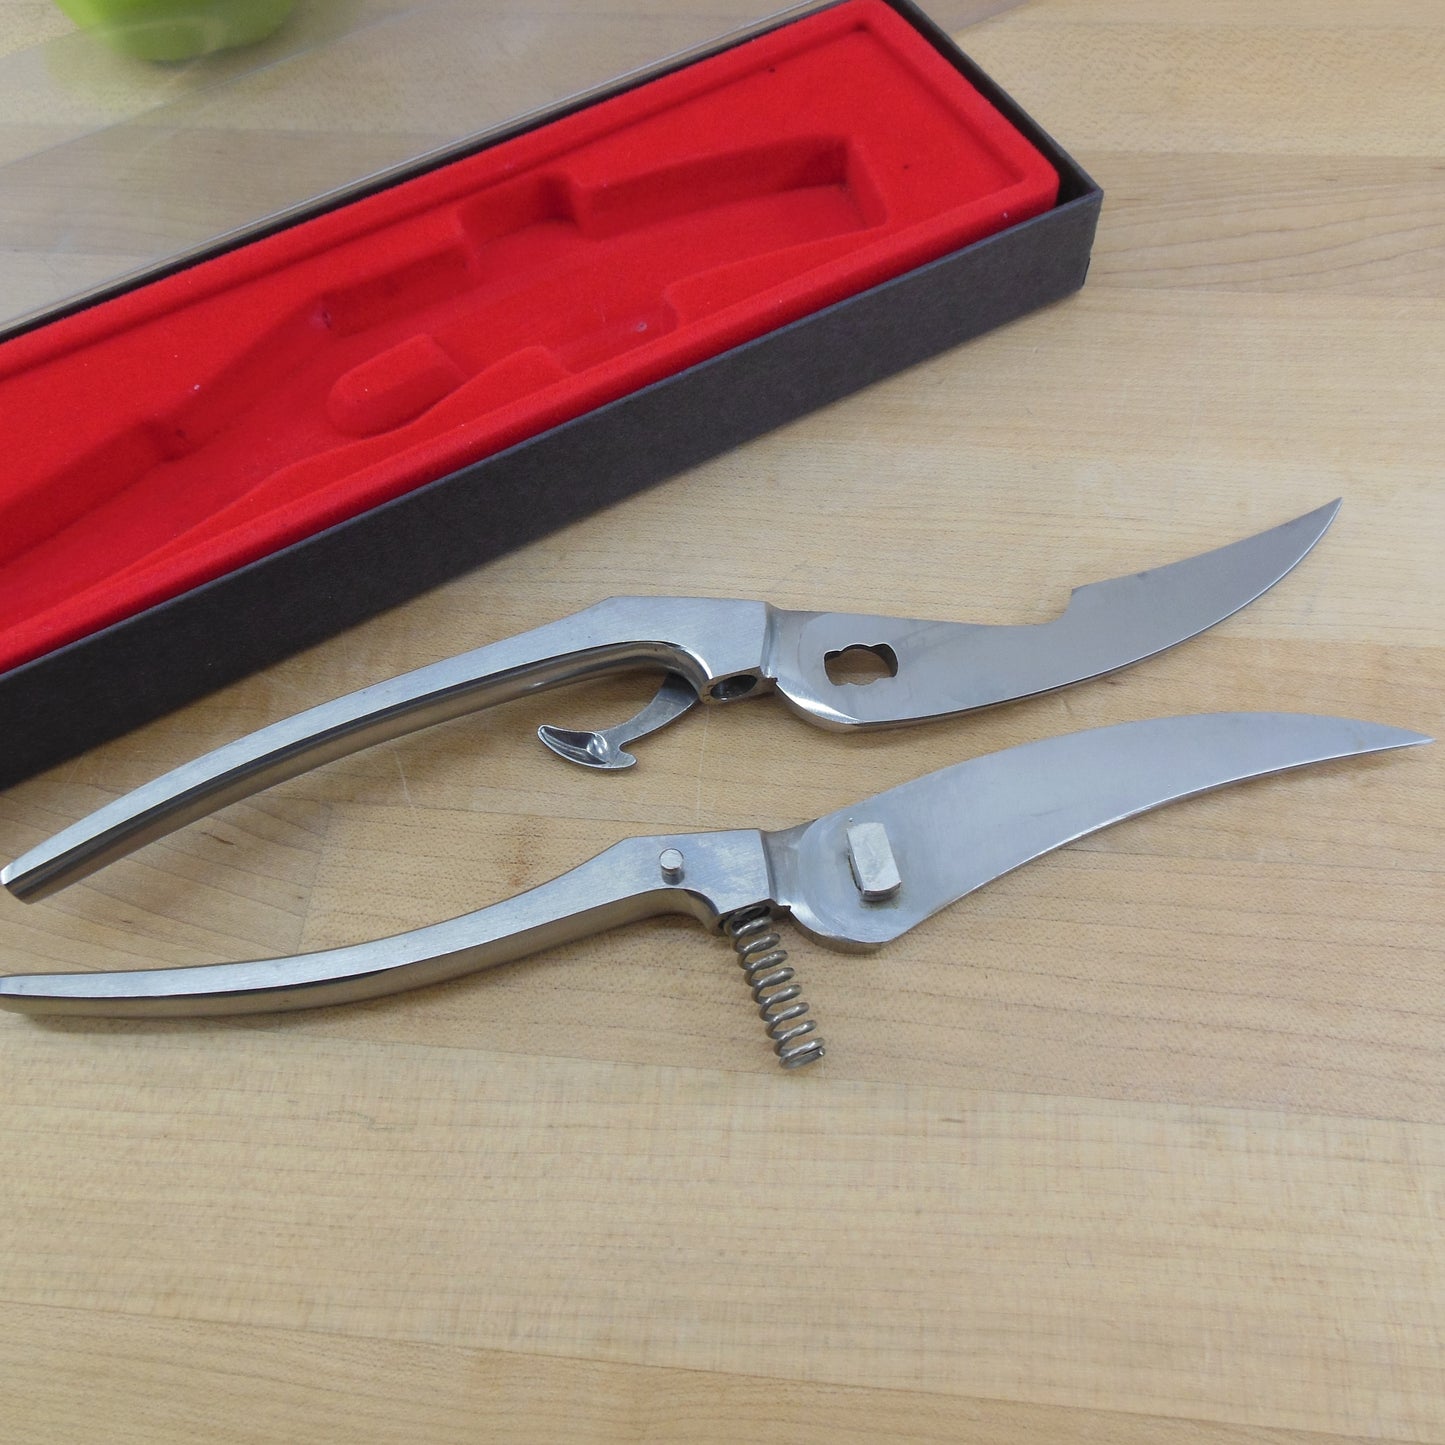 Deluxe Poultry Shears - Preferred By Chefs 